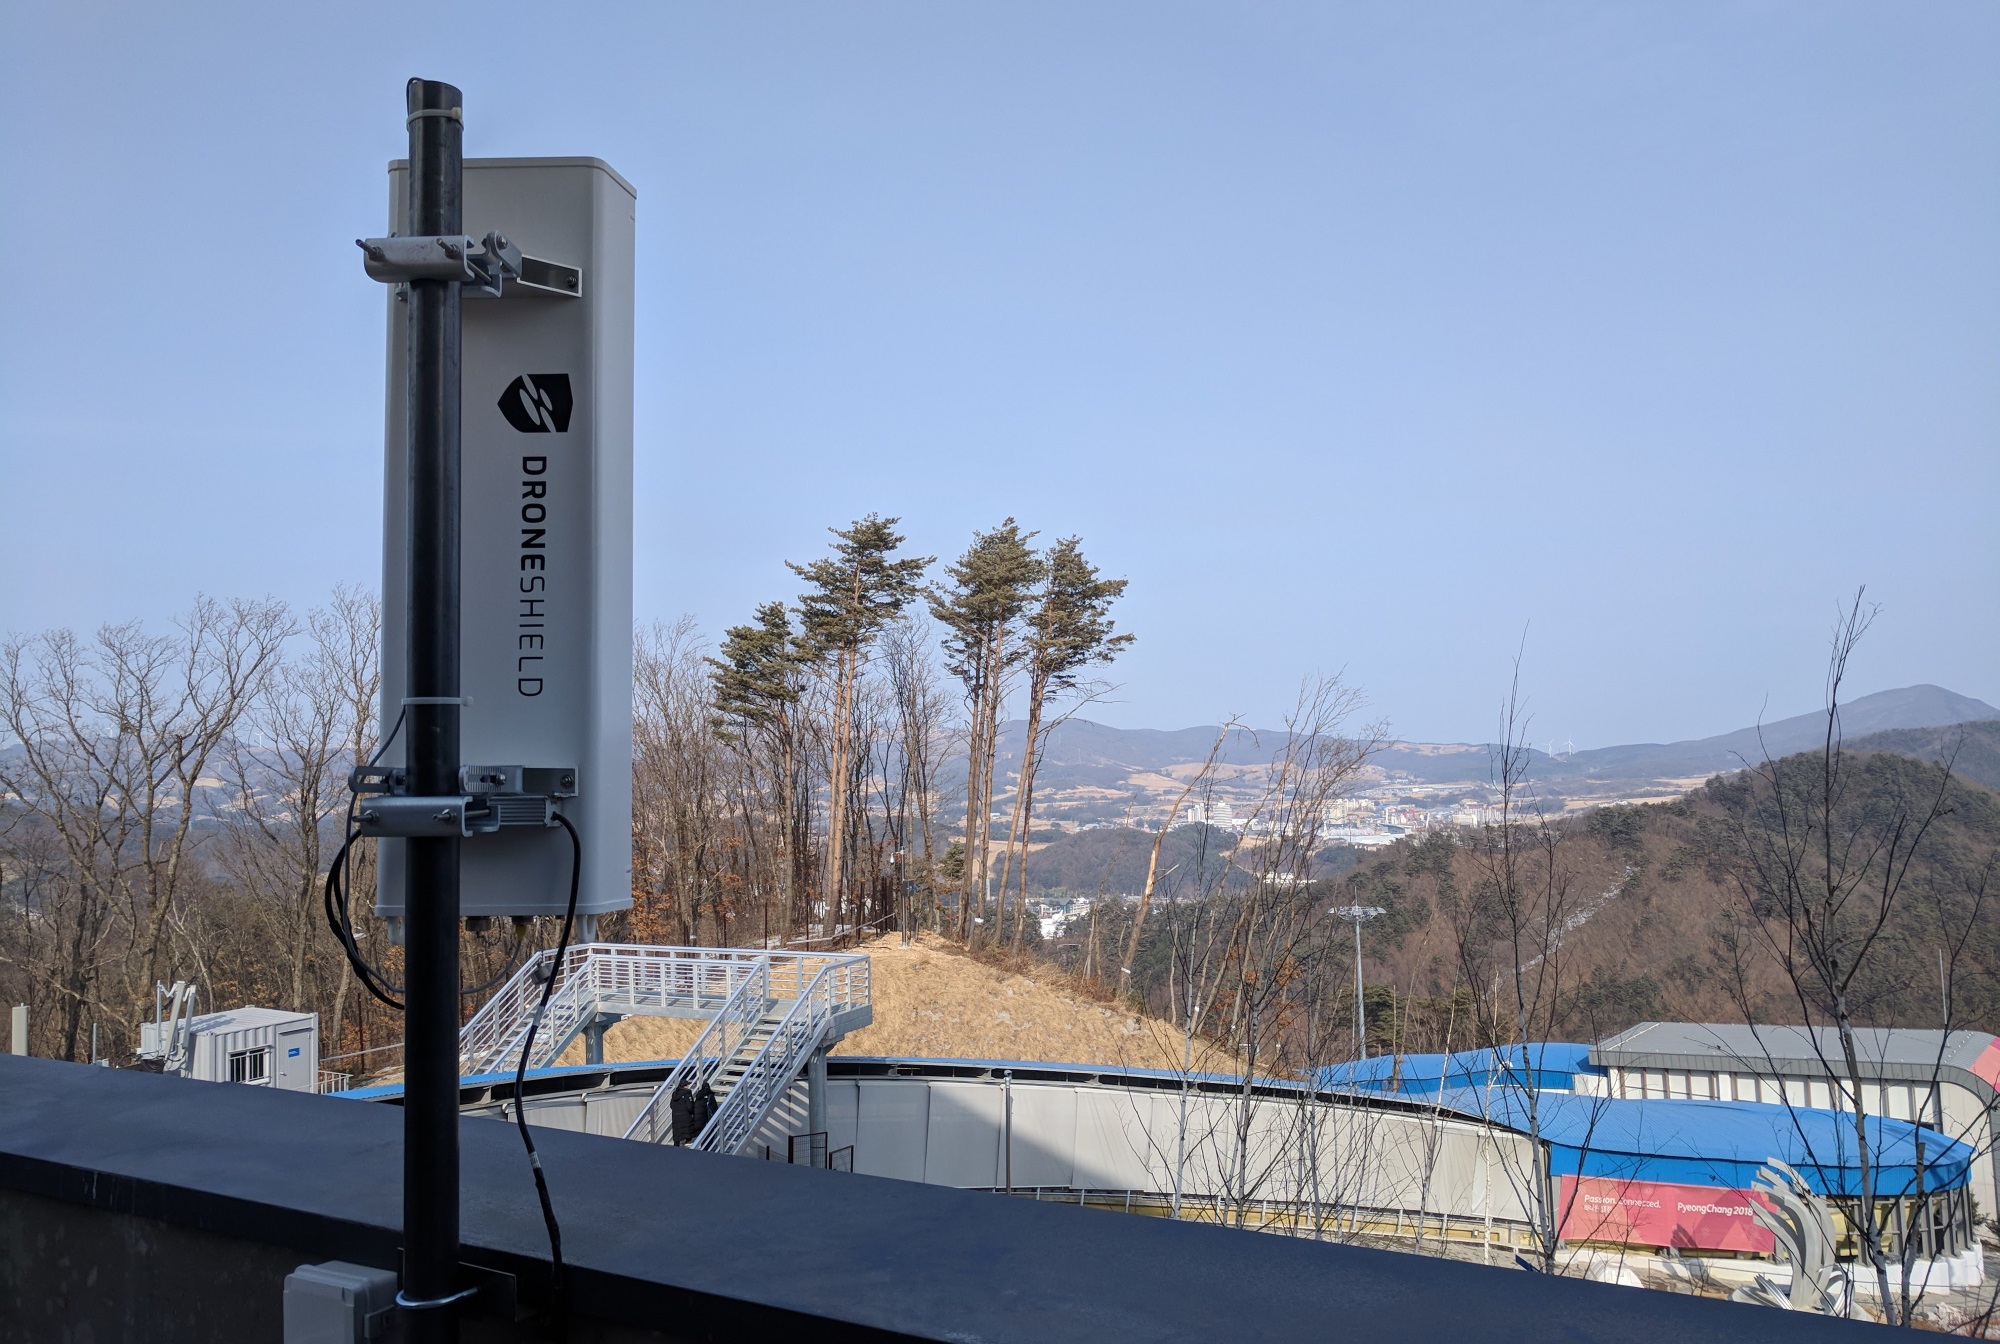 DroneShield’s systems in place in PyeongChang